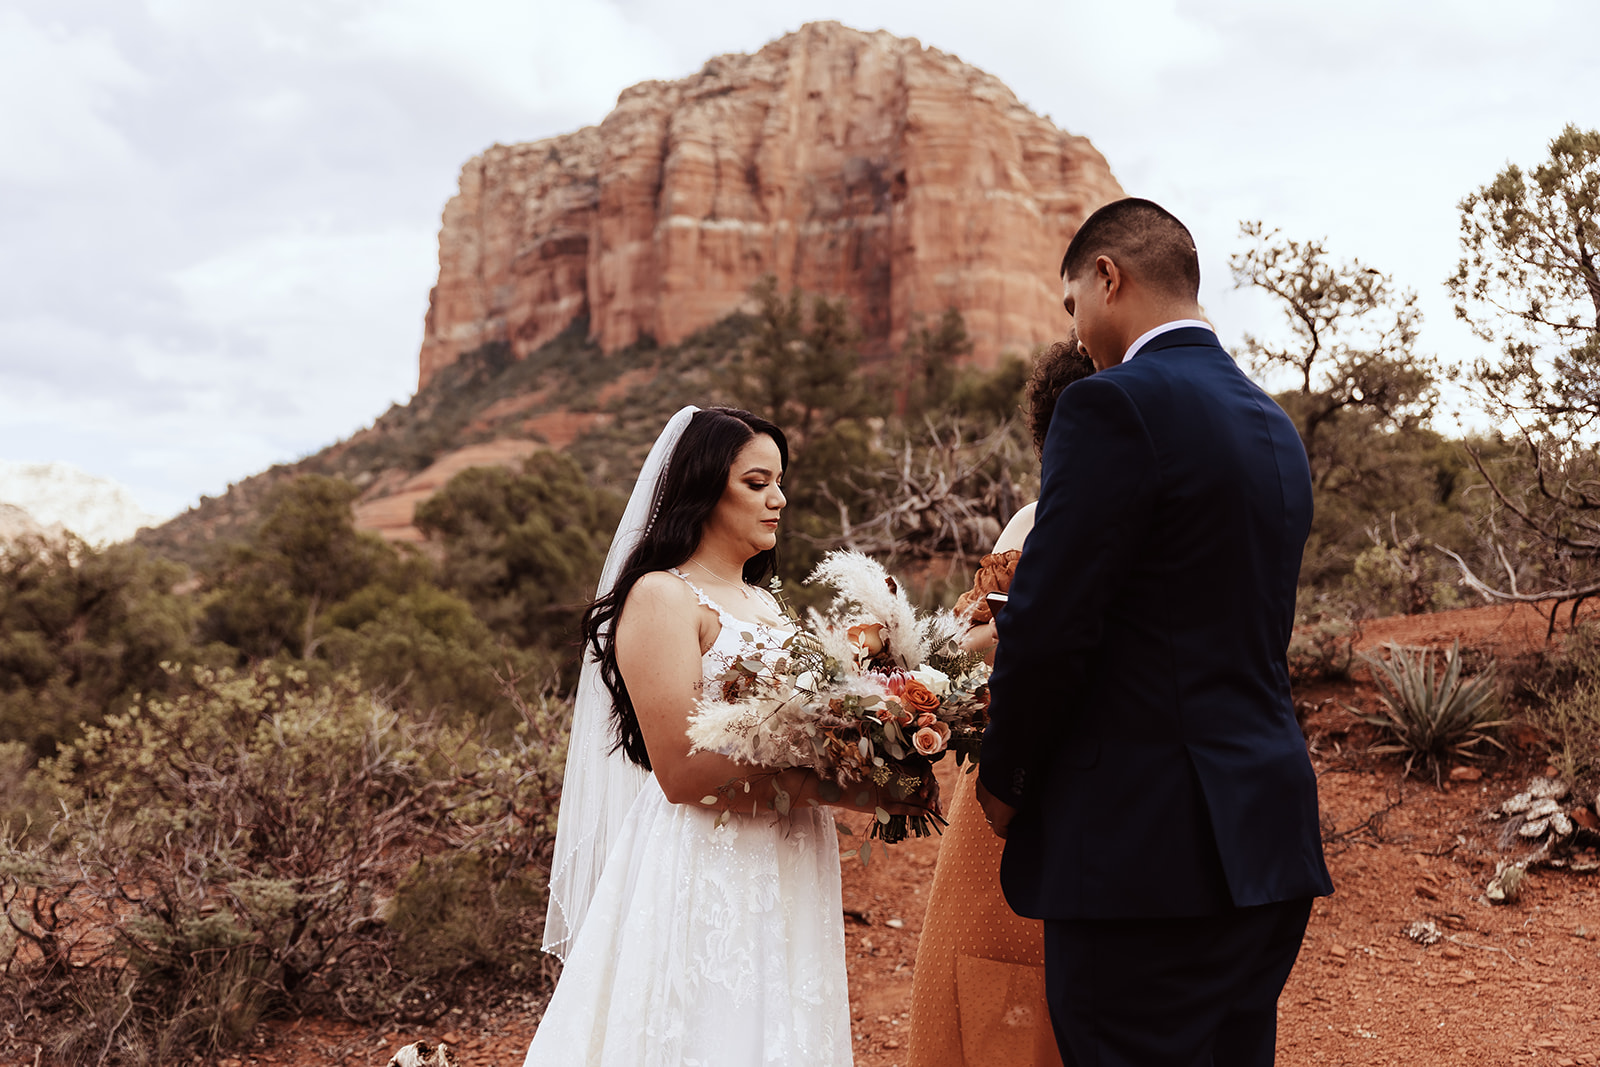 A couple who eloped in sedona say their vows